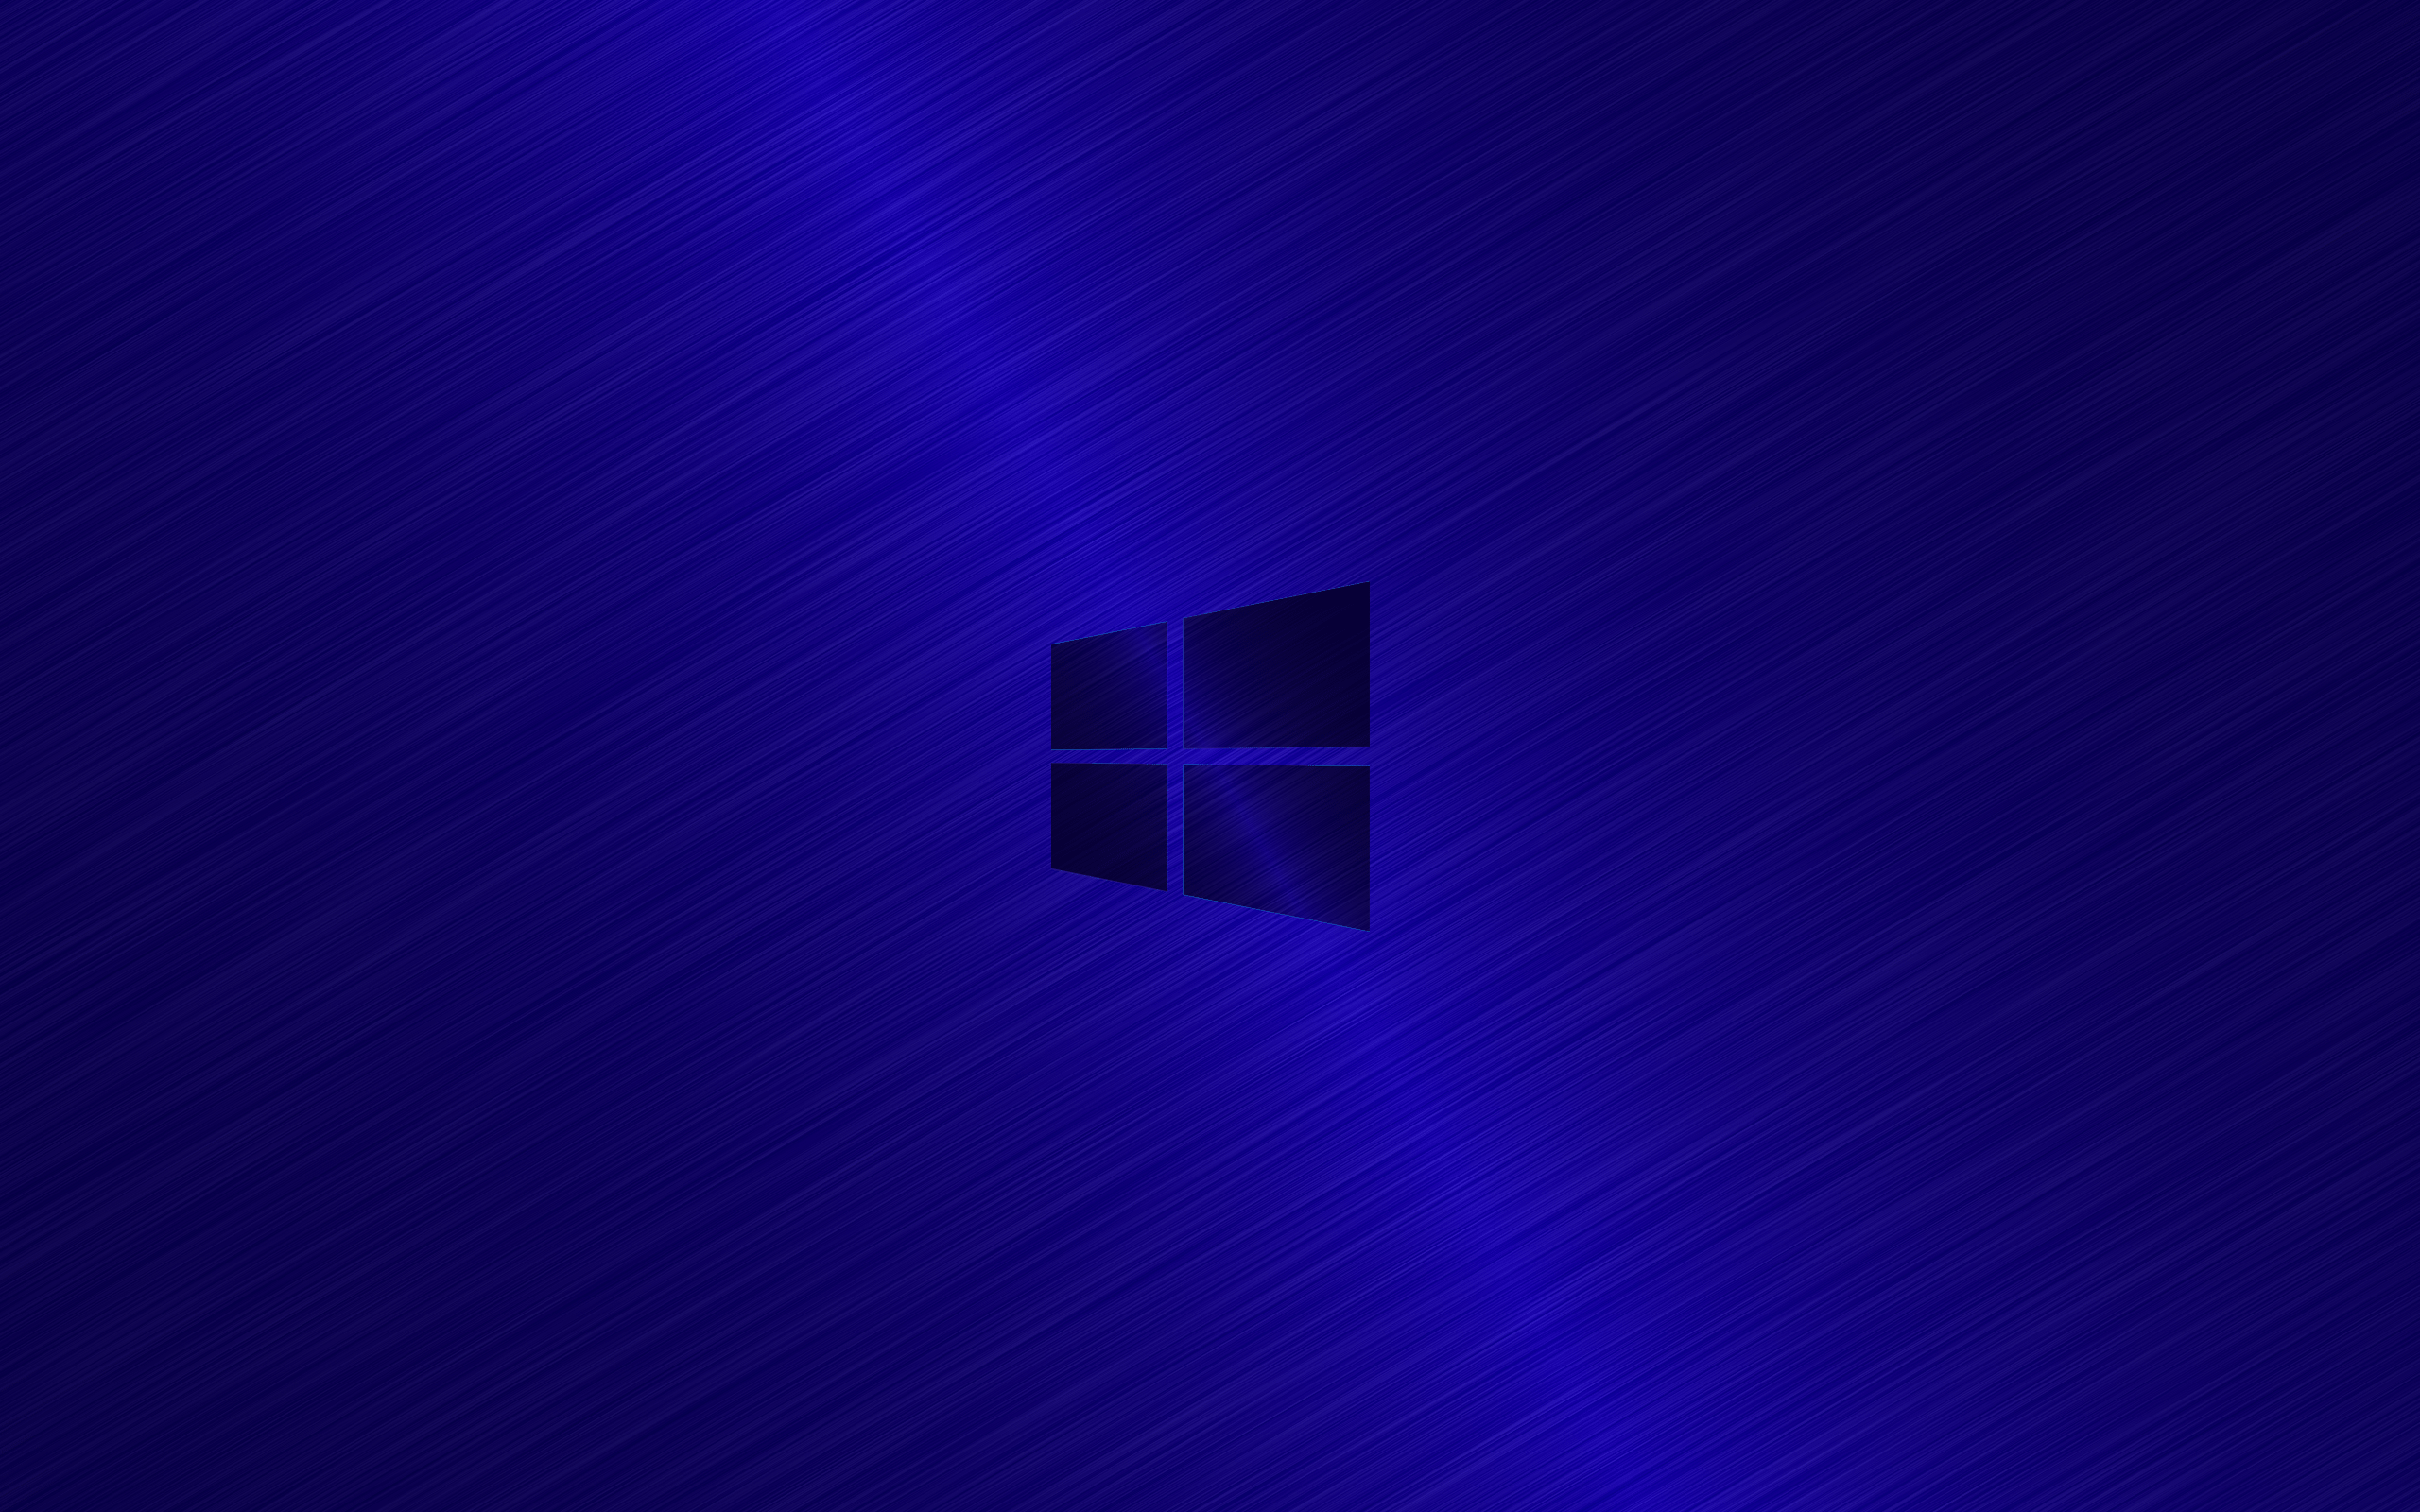 Windows 10 Blue Wallpapers Top Free Windows 10 Blue Backgrounds